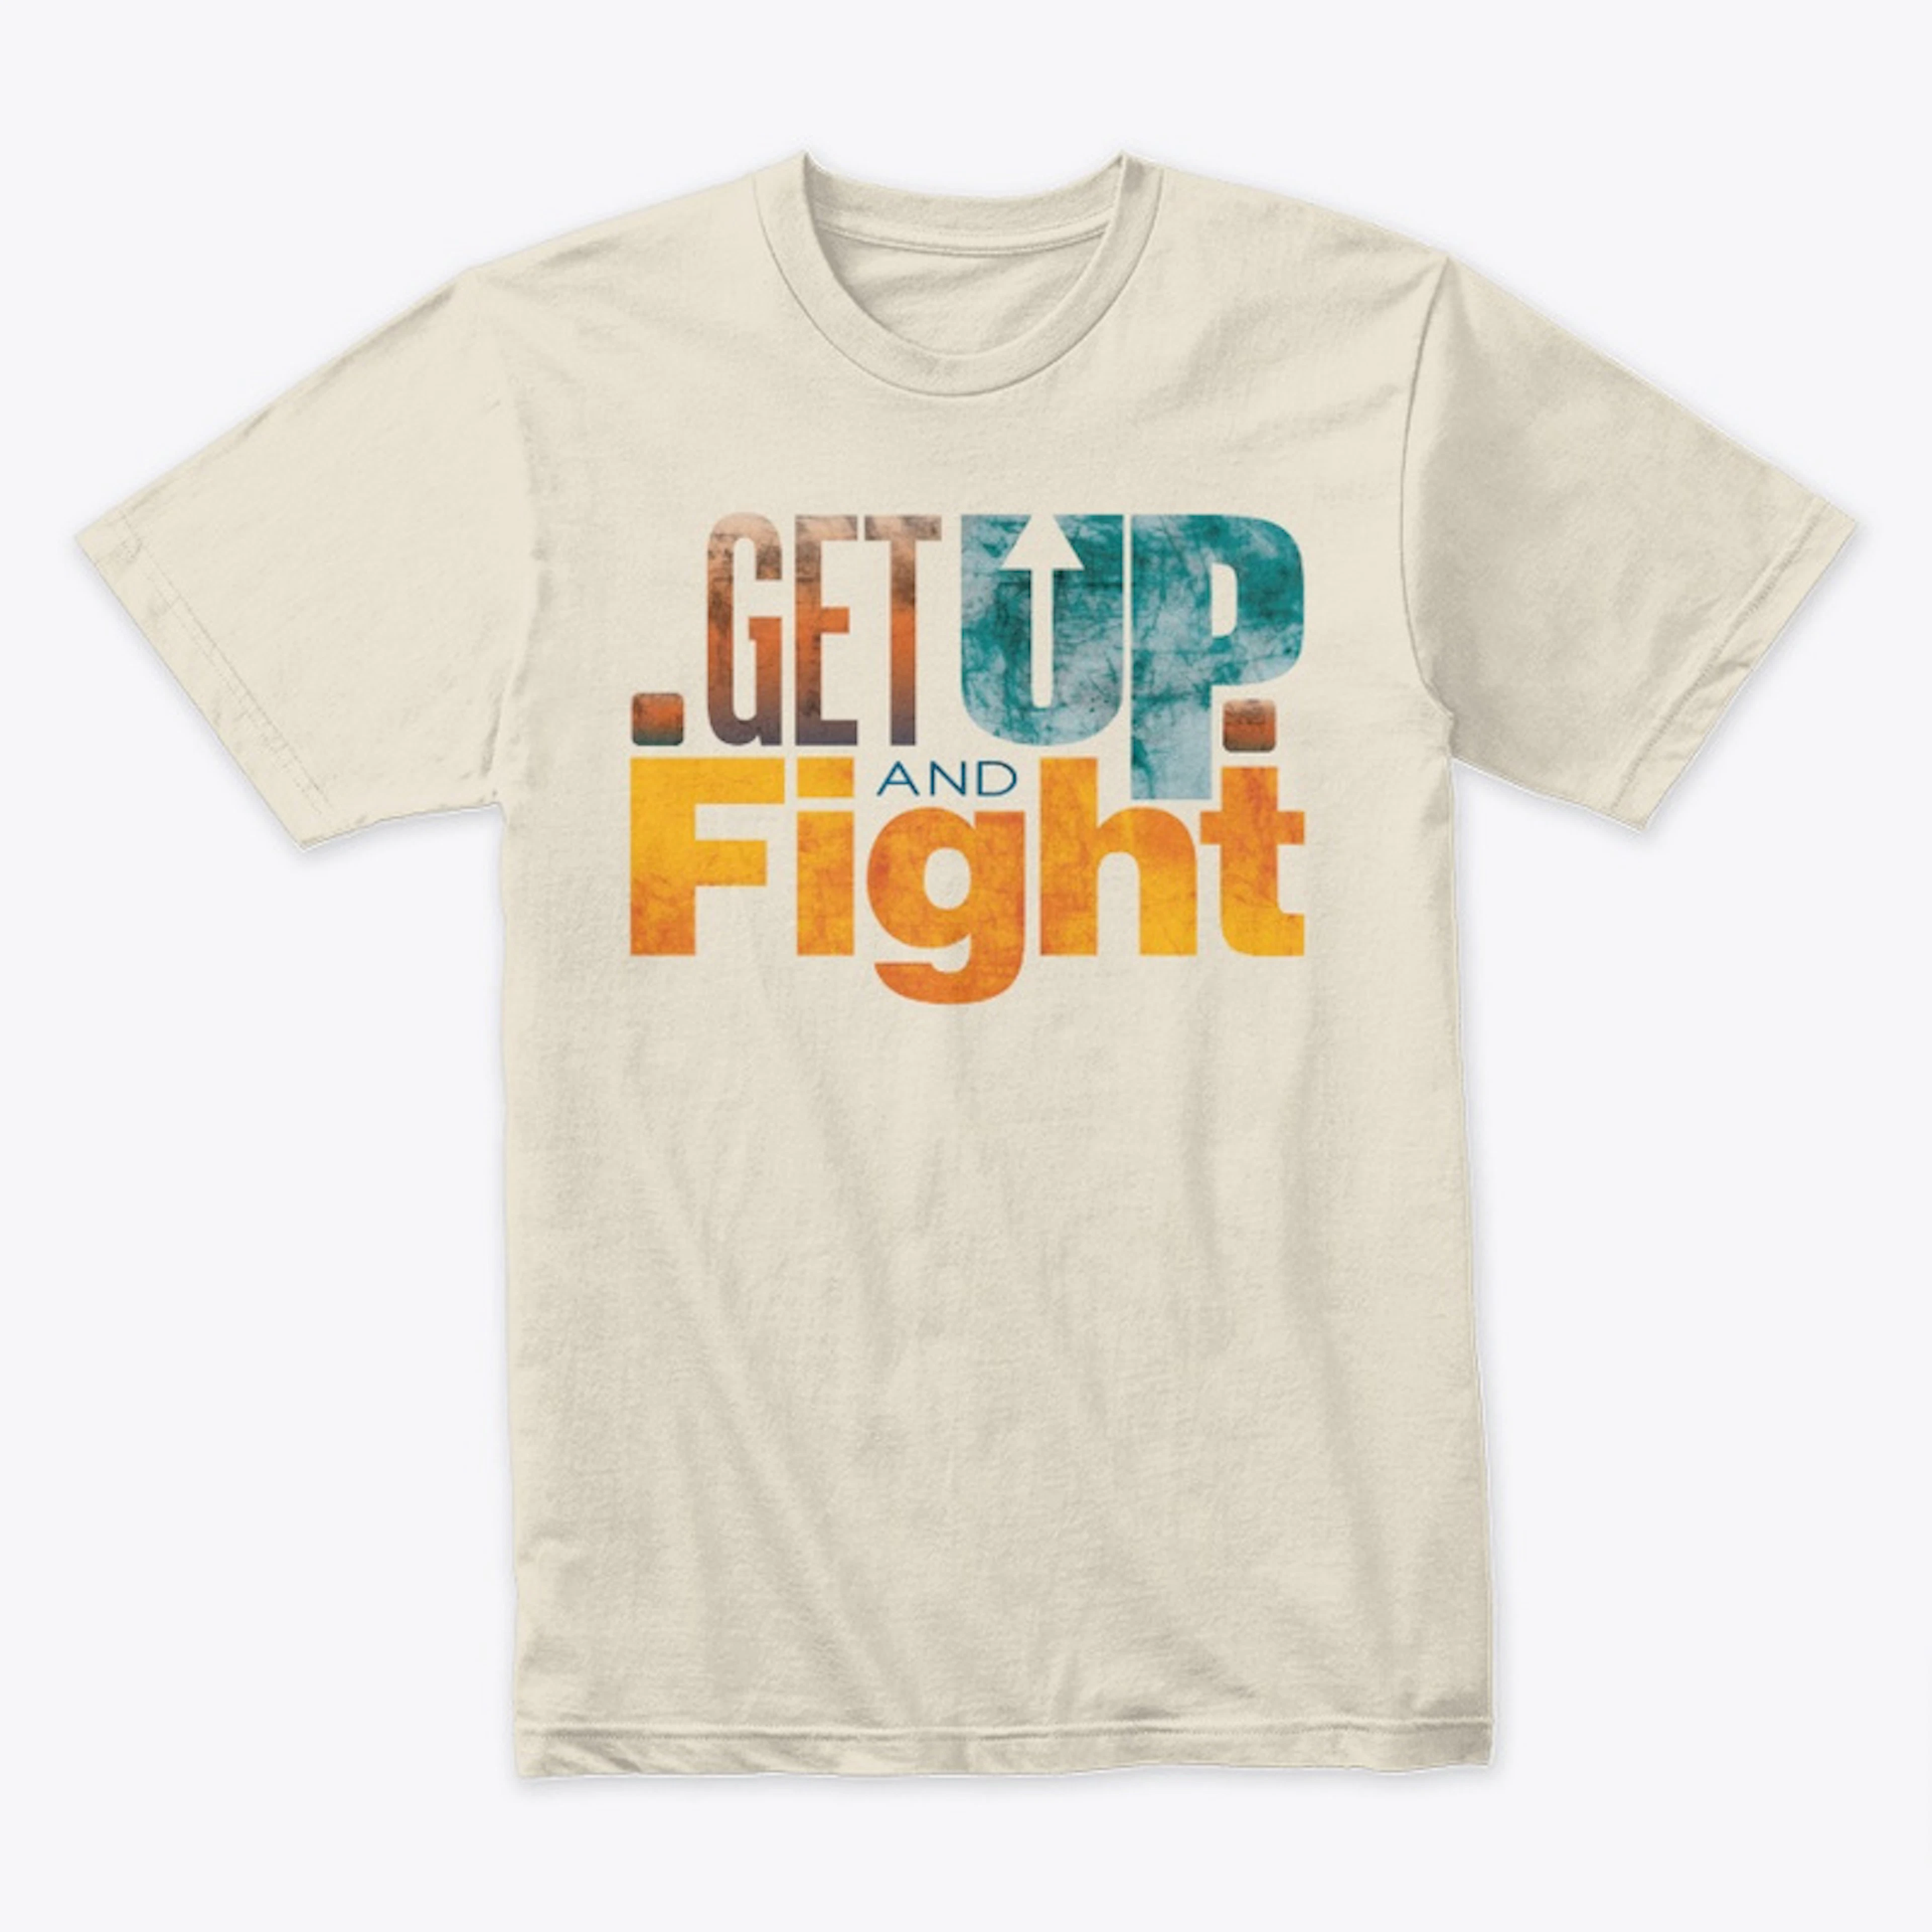 Get Up and Fight